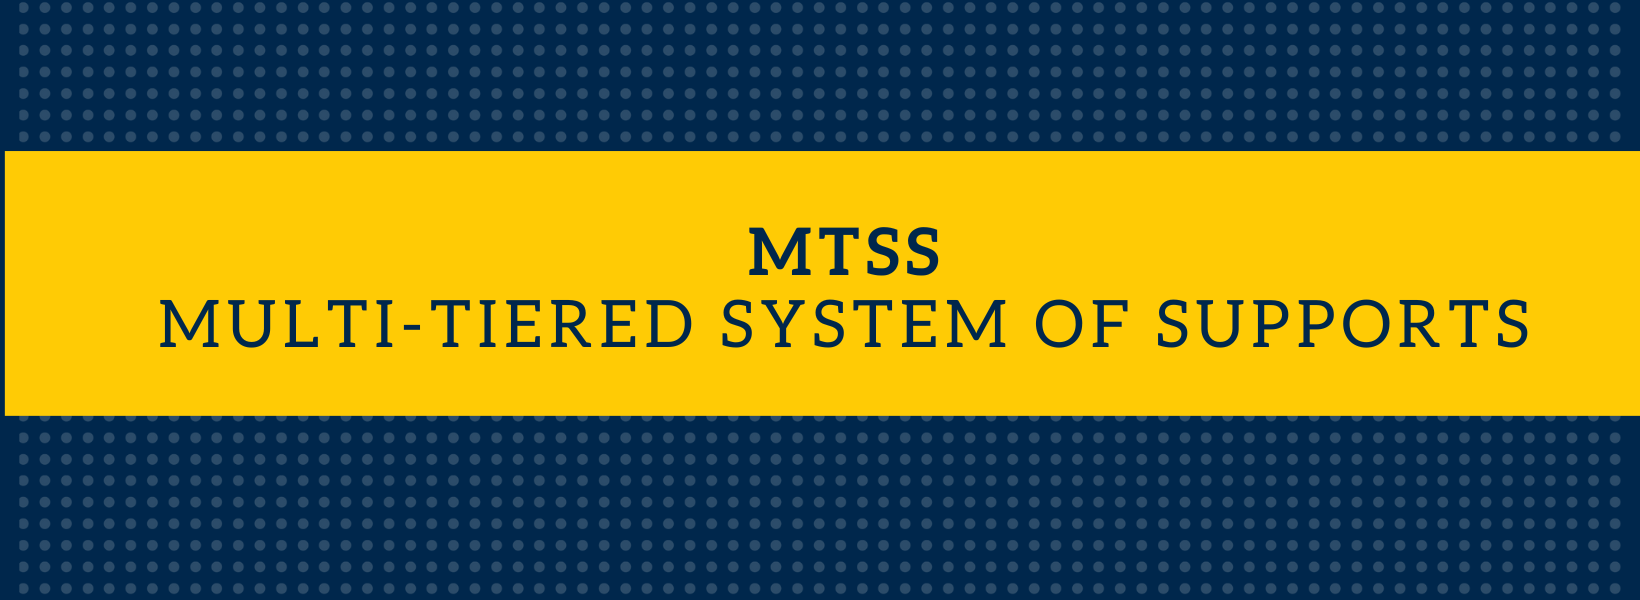 MTSS - Multi-Tiered System of Supports